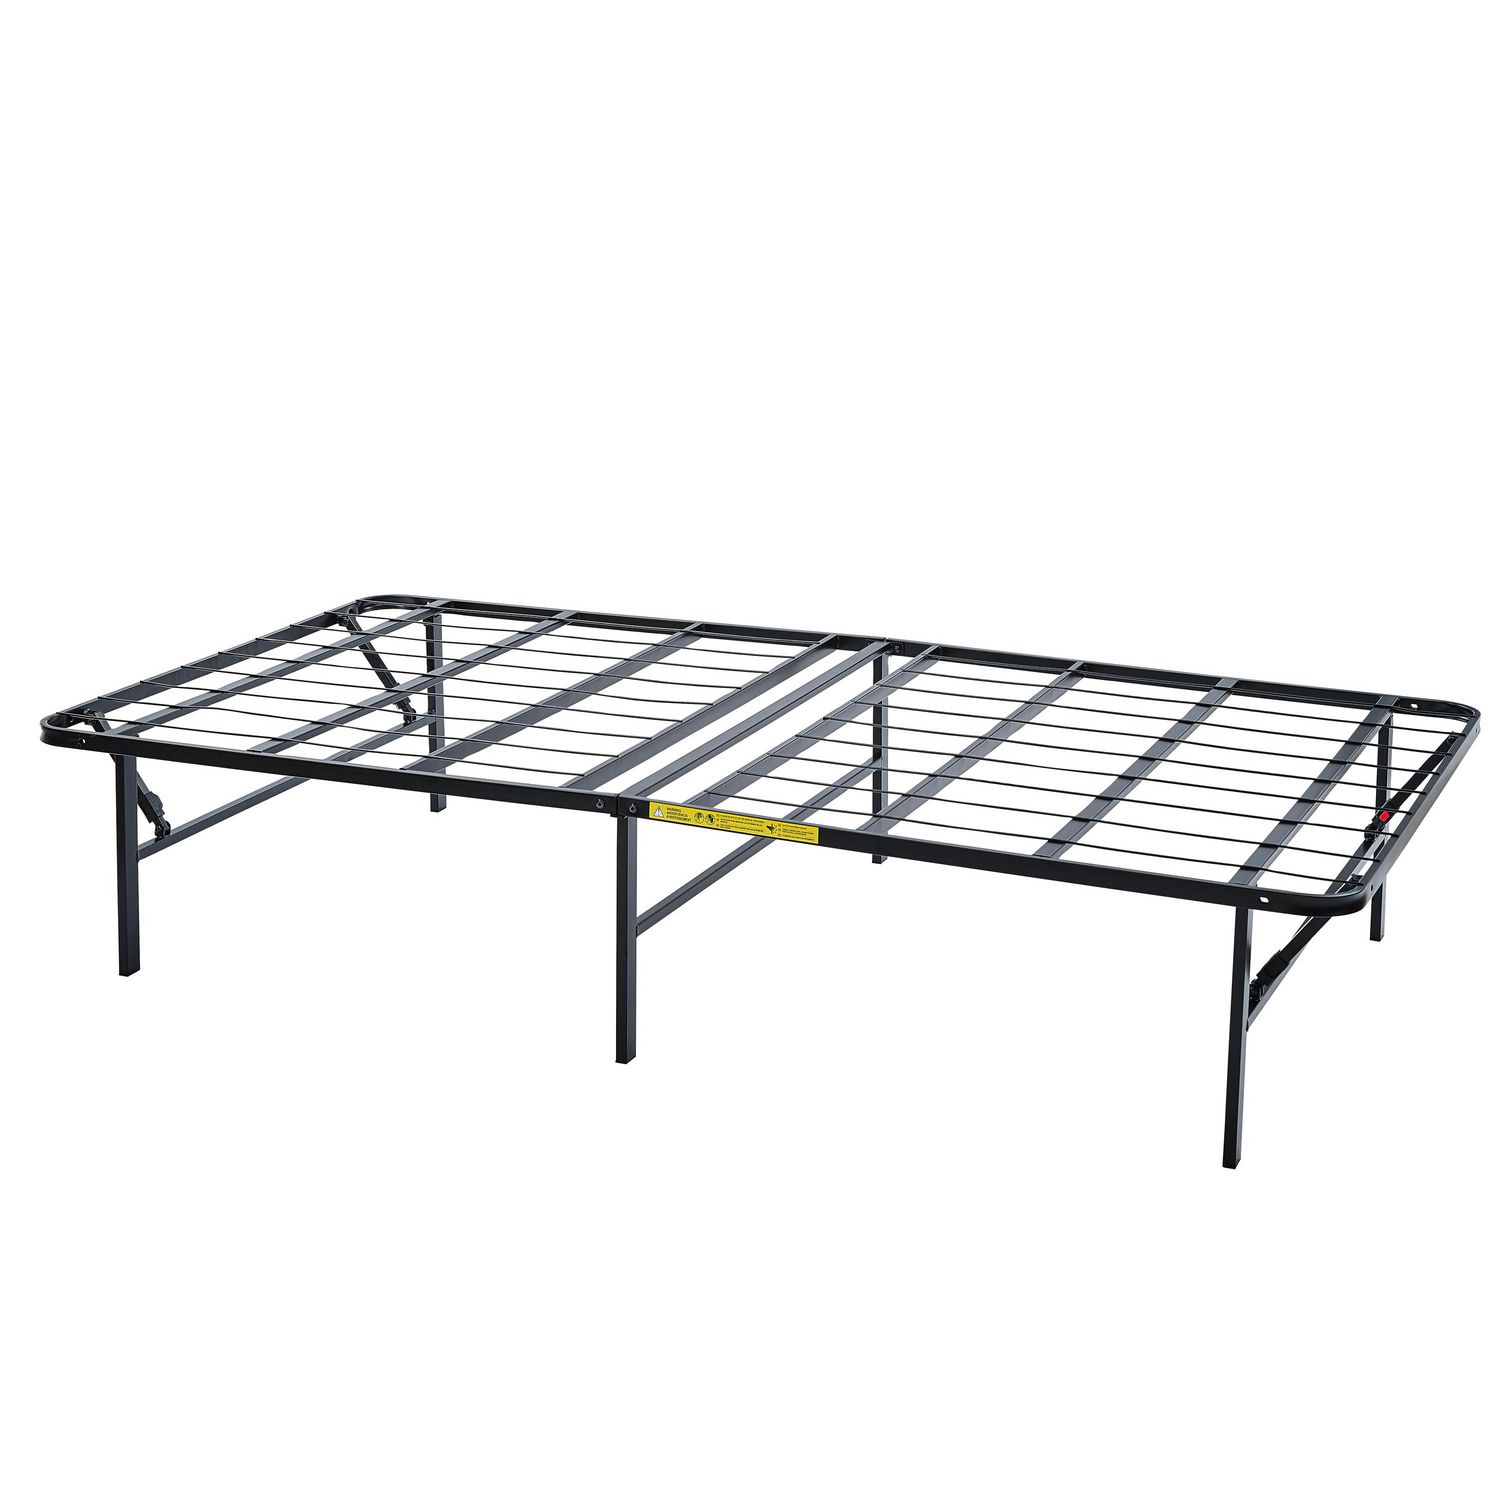 High Profile Foldable Steel Bed Frame, Twin Size Folding Bed Frame